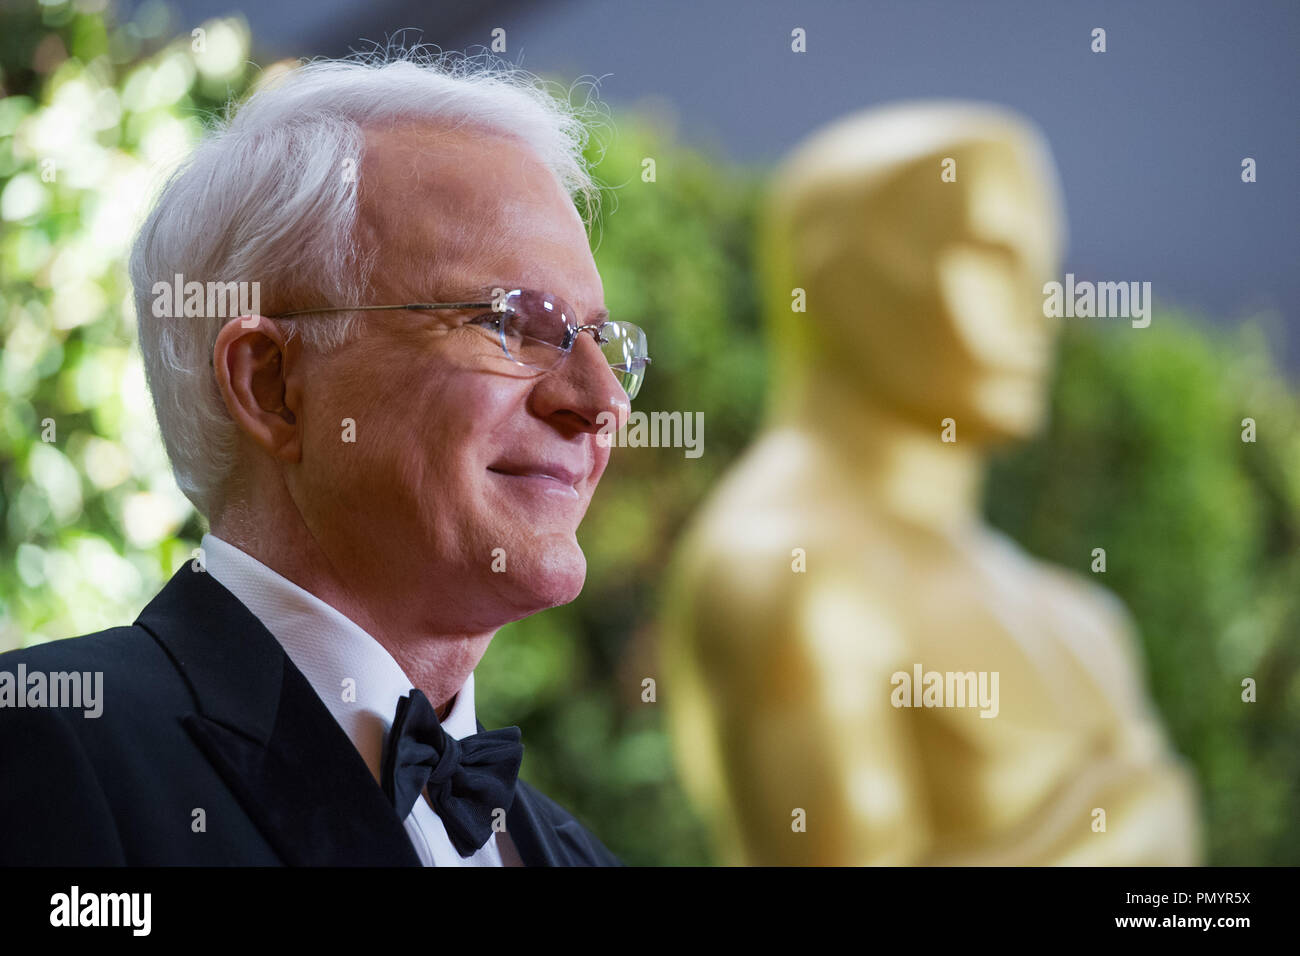 Honorary Award recipient Steve Martin attends the 5th Annual Governors Awards at The Ray Dolby Ballroom at Hollywood & Highland Center® in Hollywood, CA, on Saturday, November 16, 2013.  File Reference # 32184 070  For Editorial Use Only -  All Rights Reserved Stock Photo